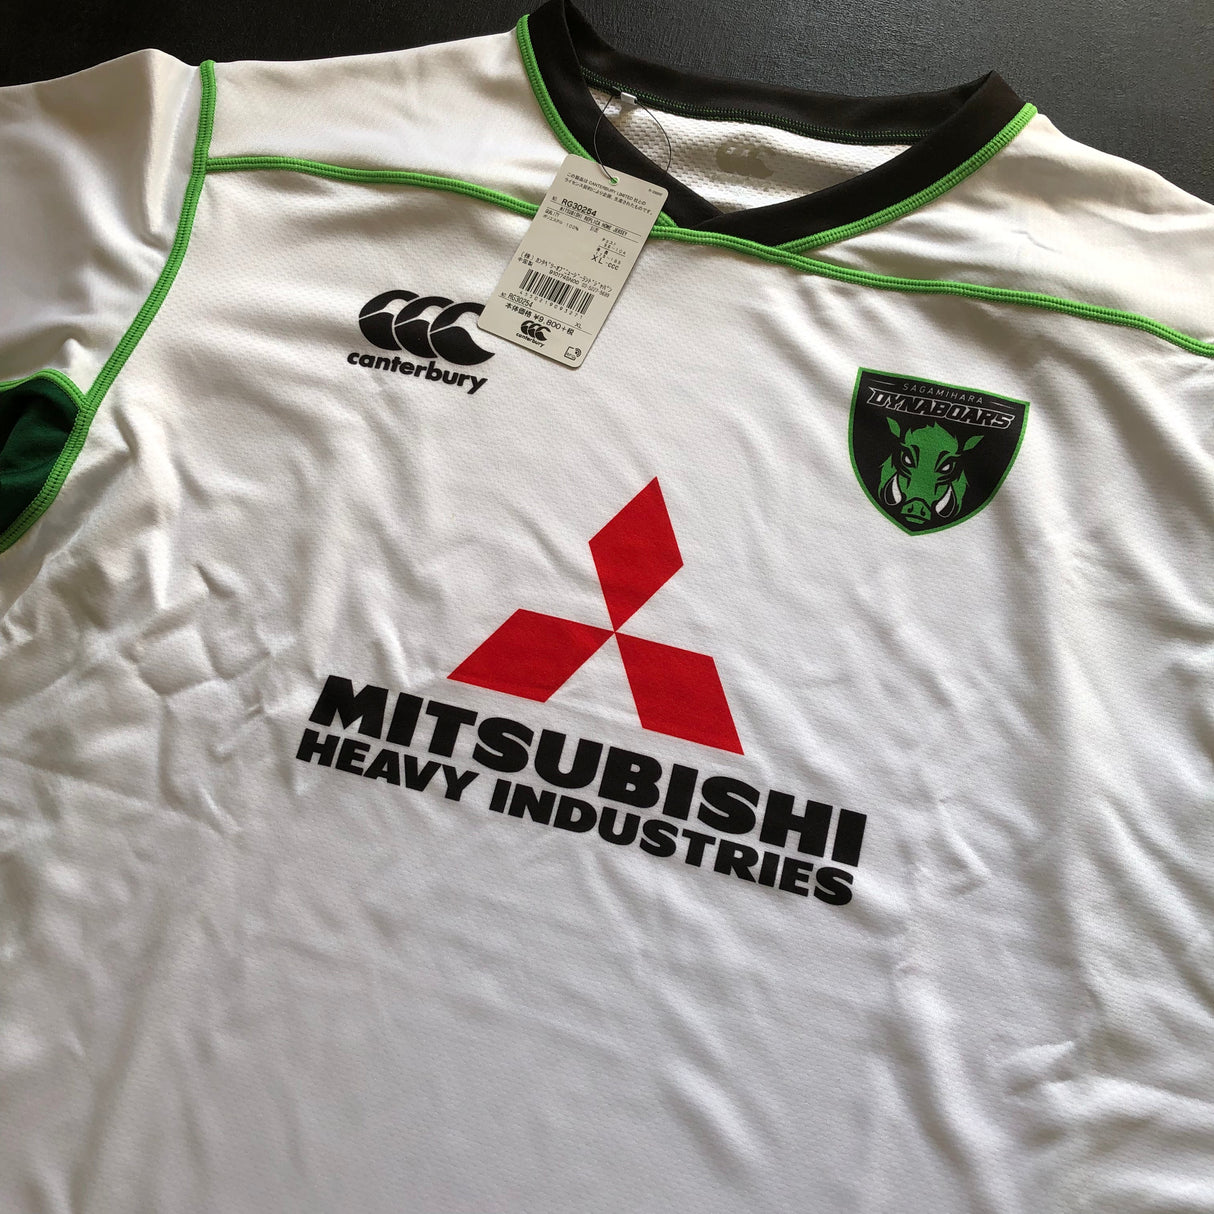 Dynaboars Rugby Team Jersey 2020 Away (Japan Top League) XL BNWT (Defect) Underdog Rugby - The Tier 2 Rugby Shop 